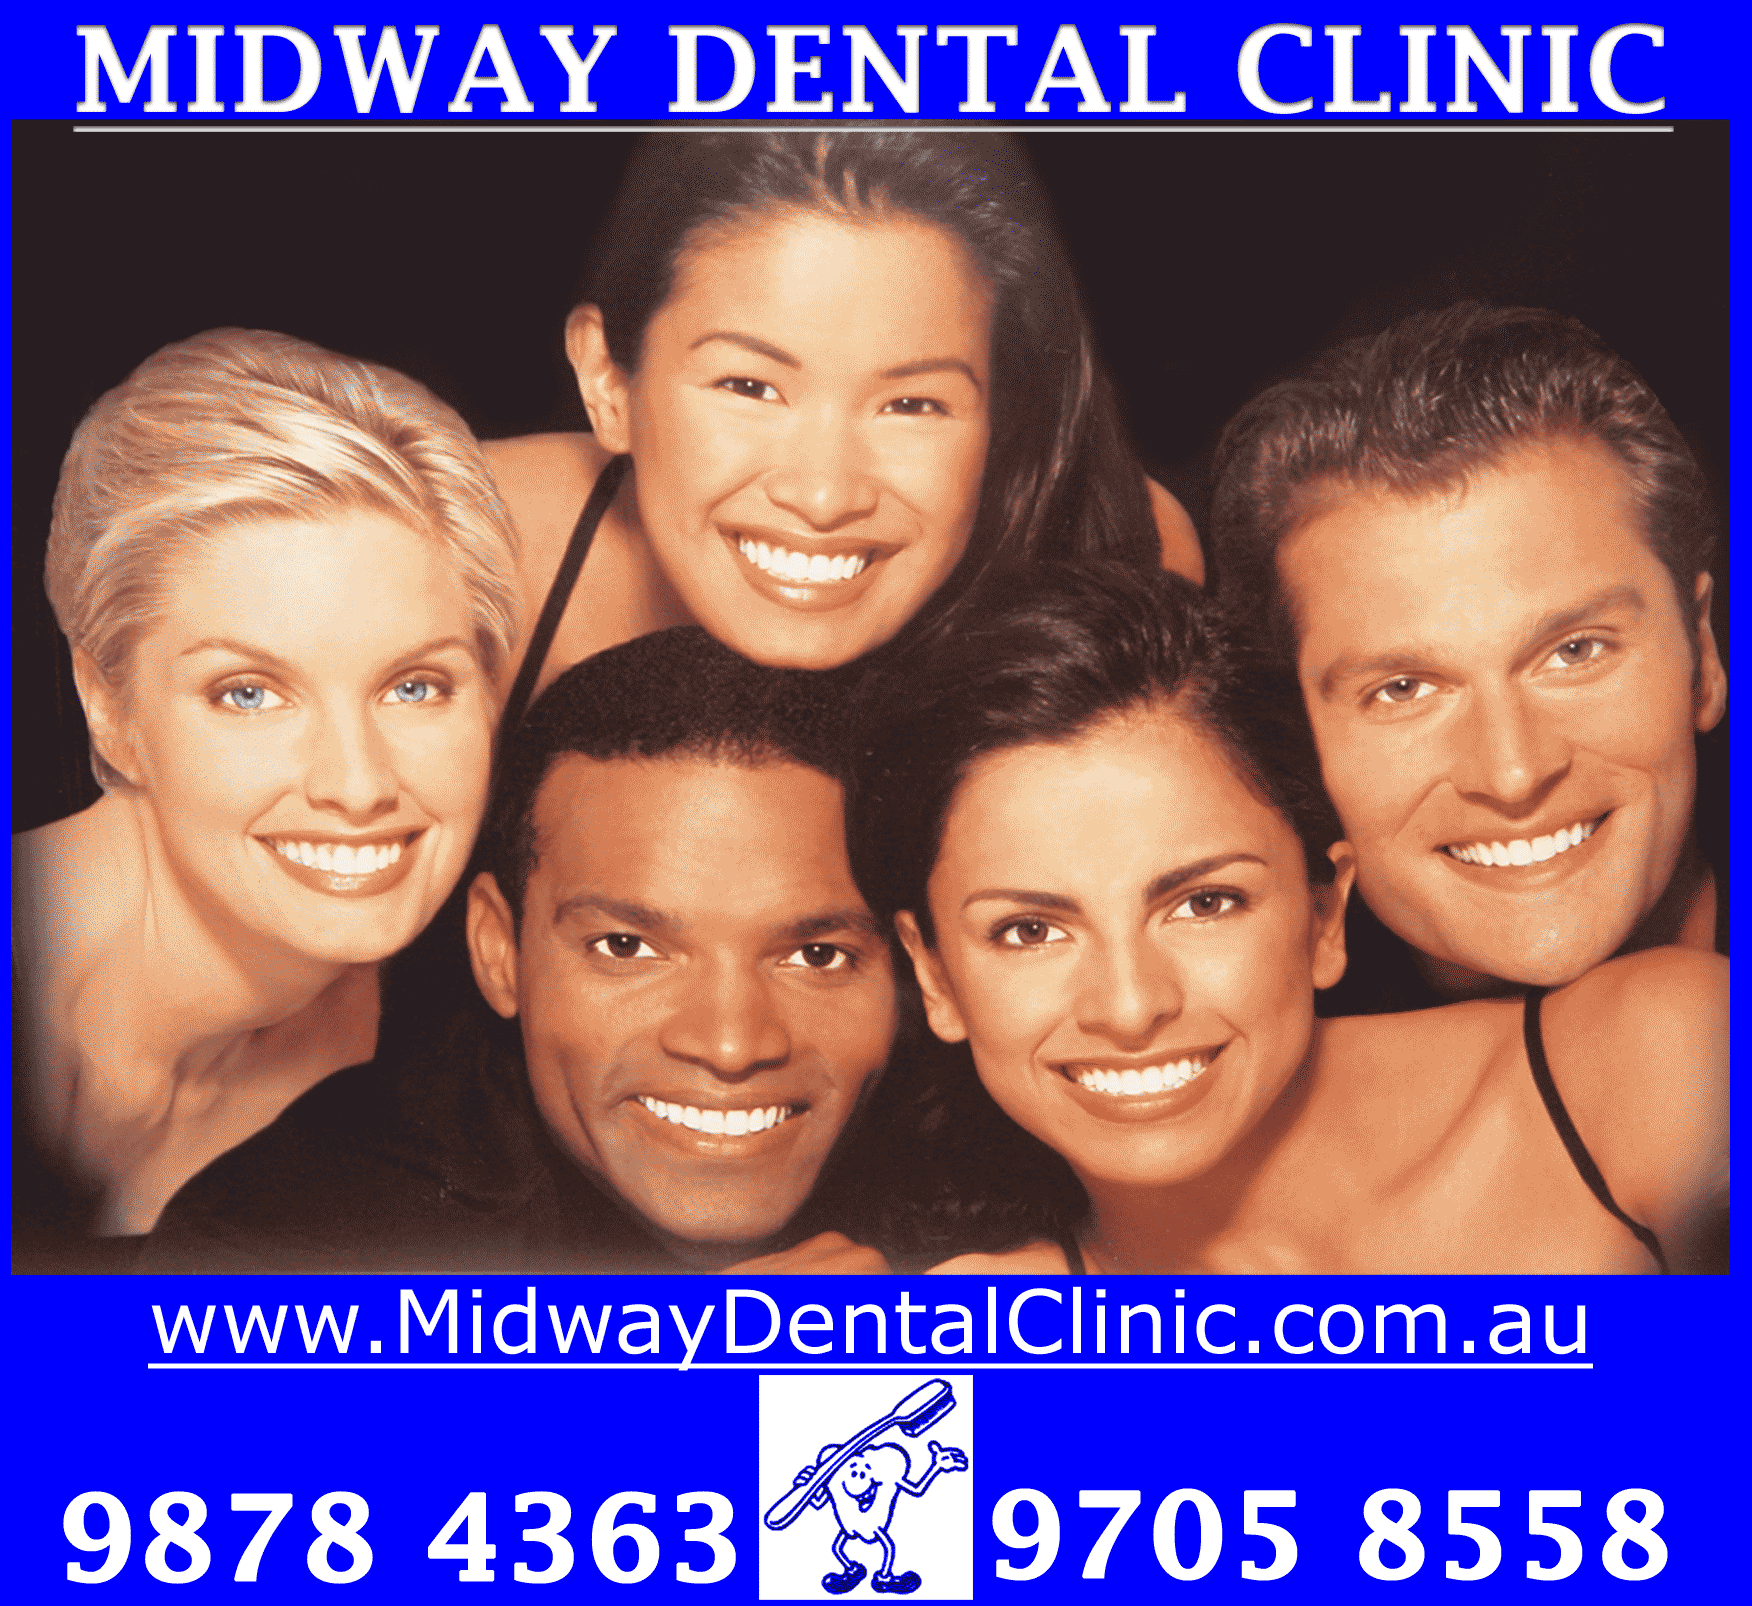 Midway Dental Clinic...